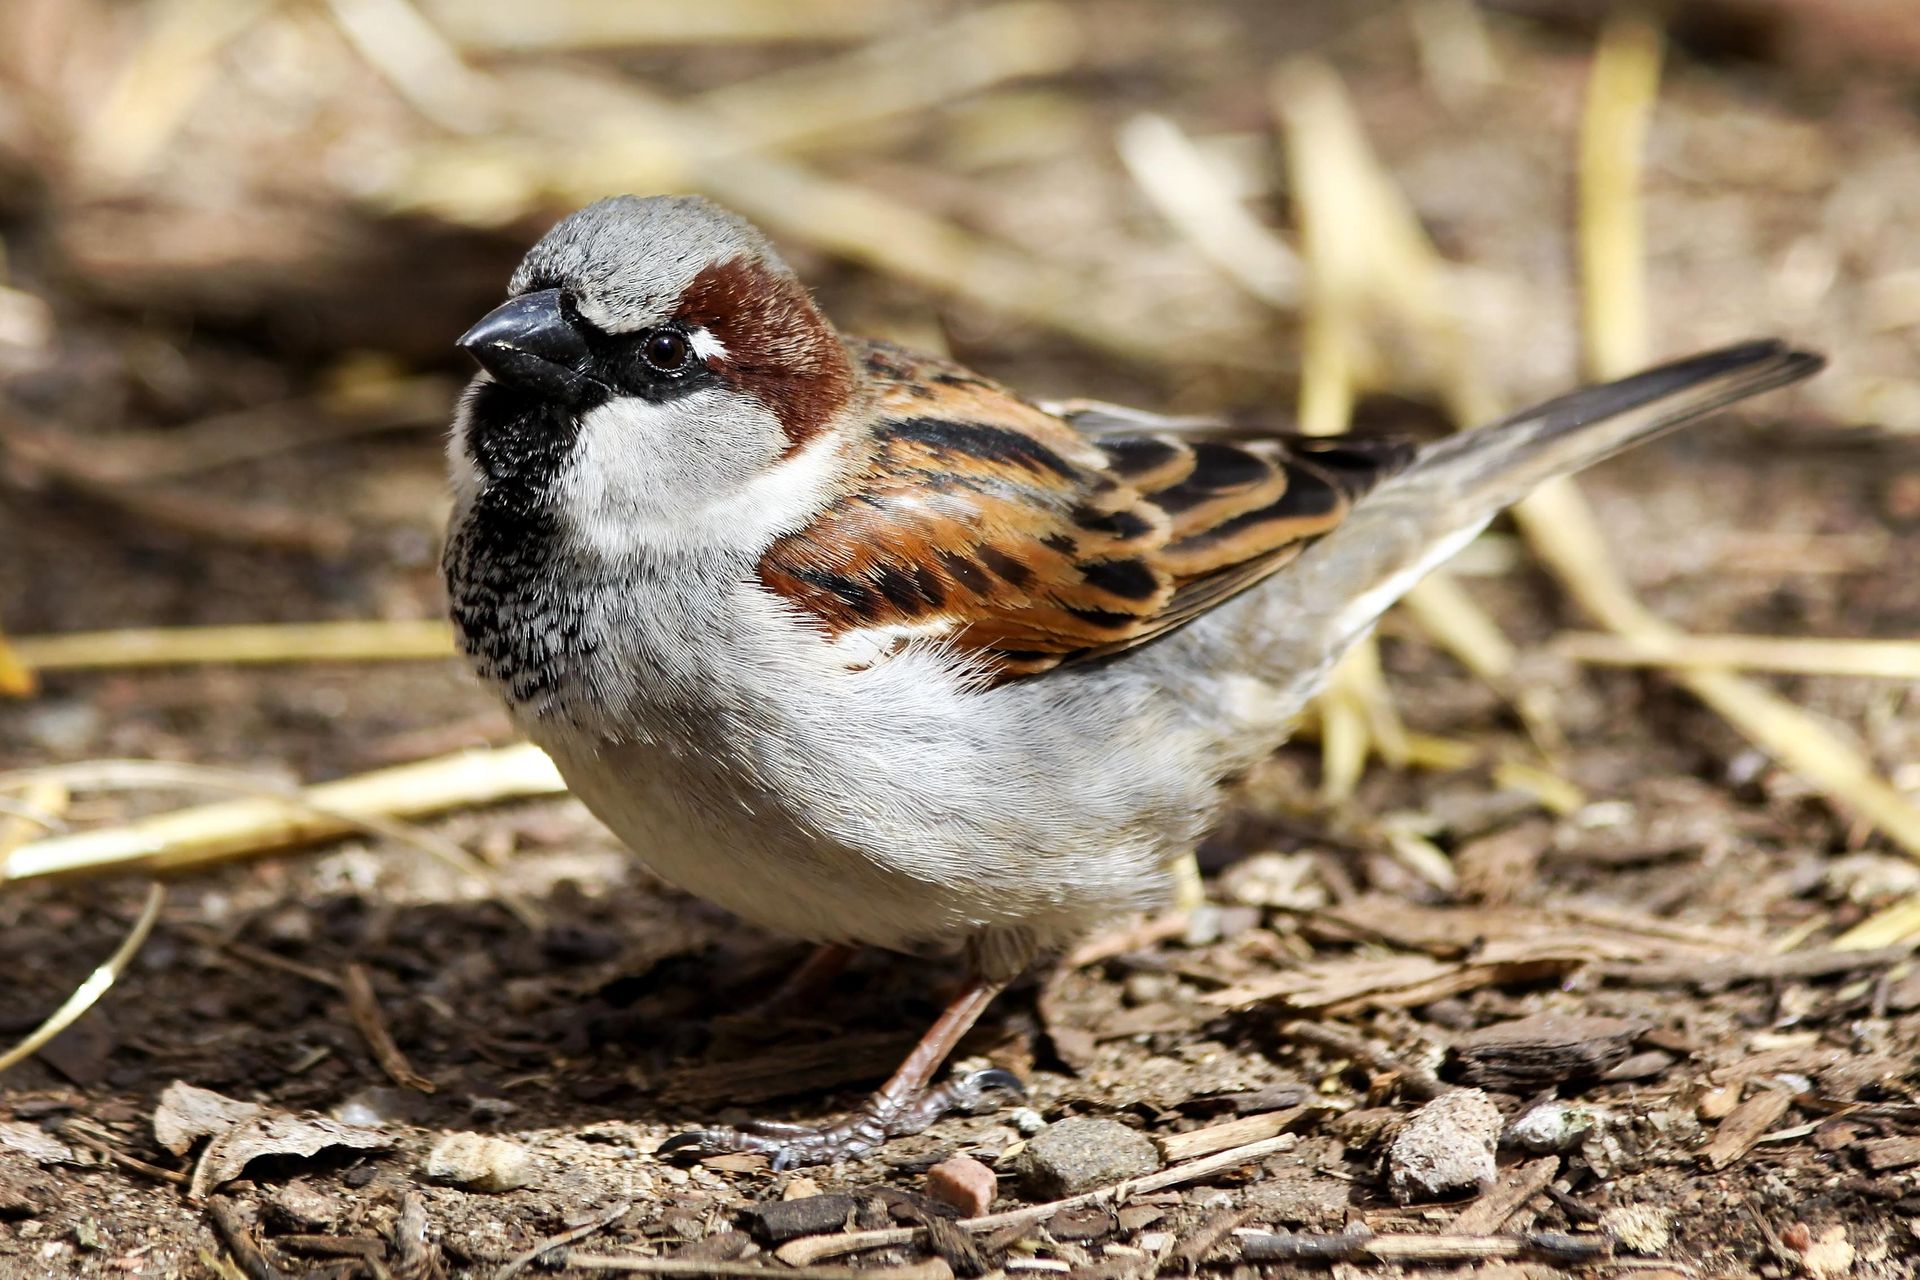 A portrait of a sparrow perched on the ground.